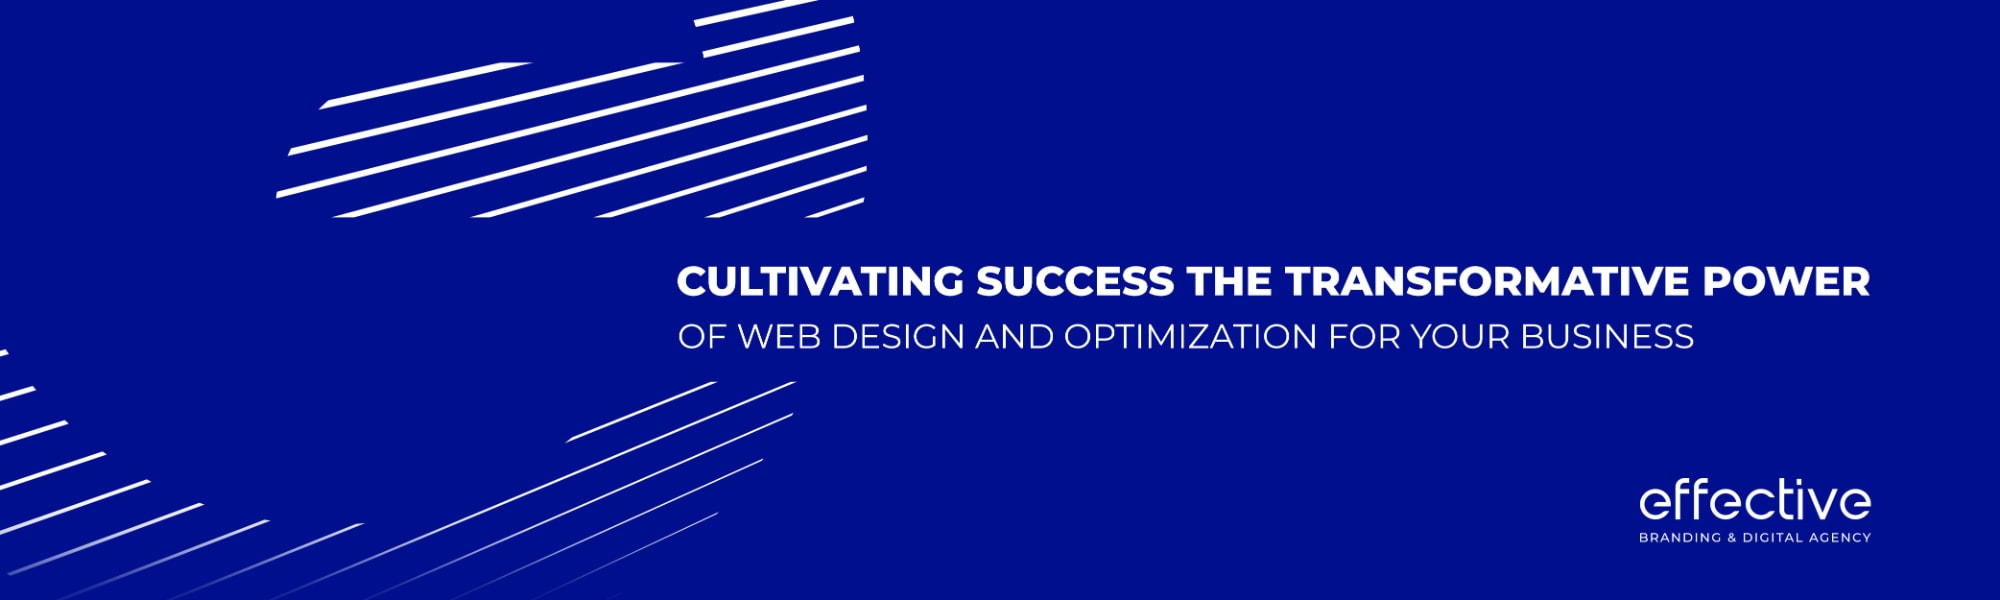 Cultivating Success: The Transformative Power of Web Design and Optimization for Your Business